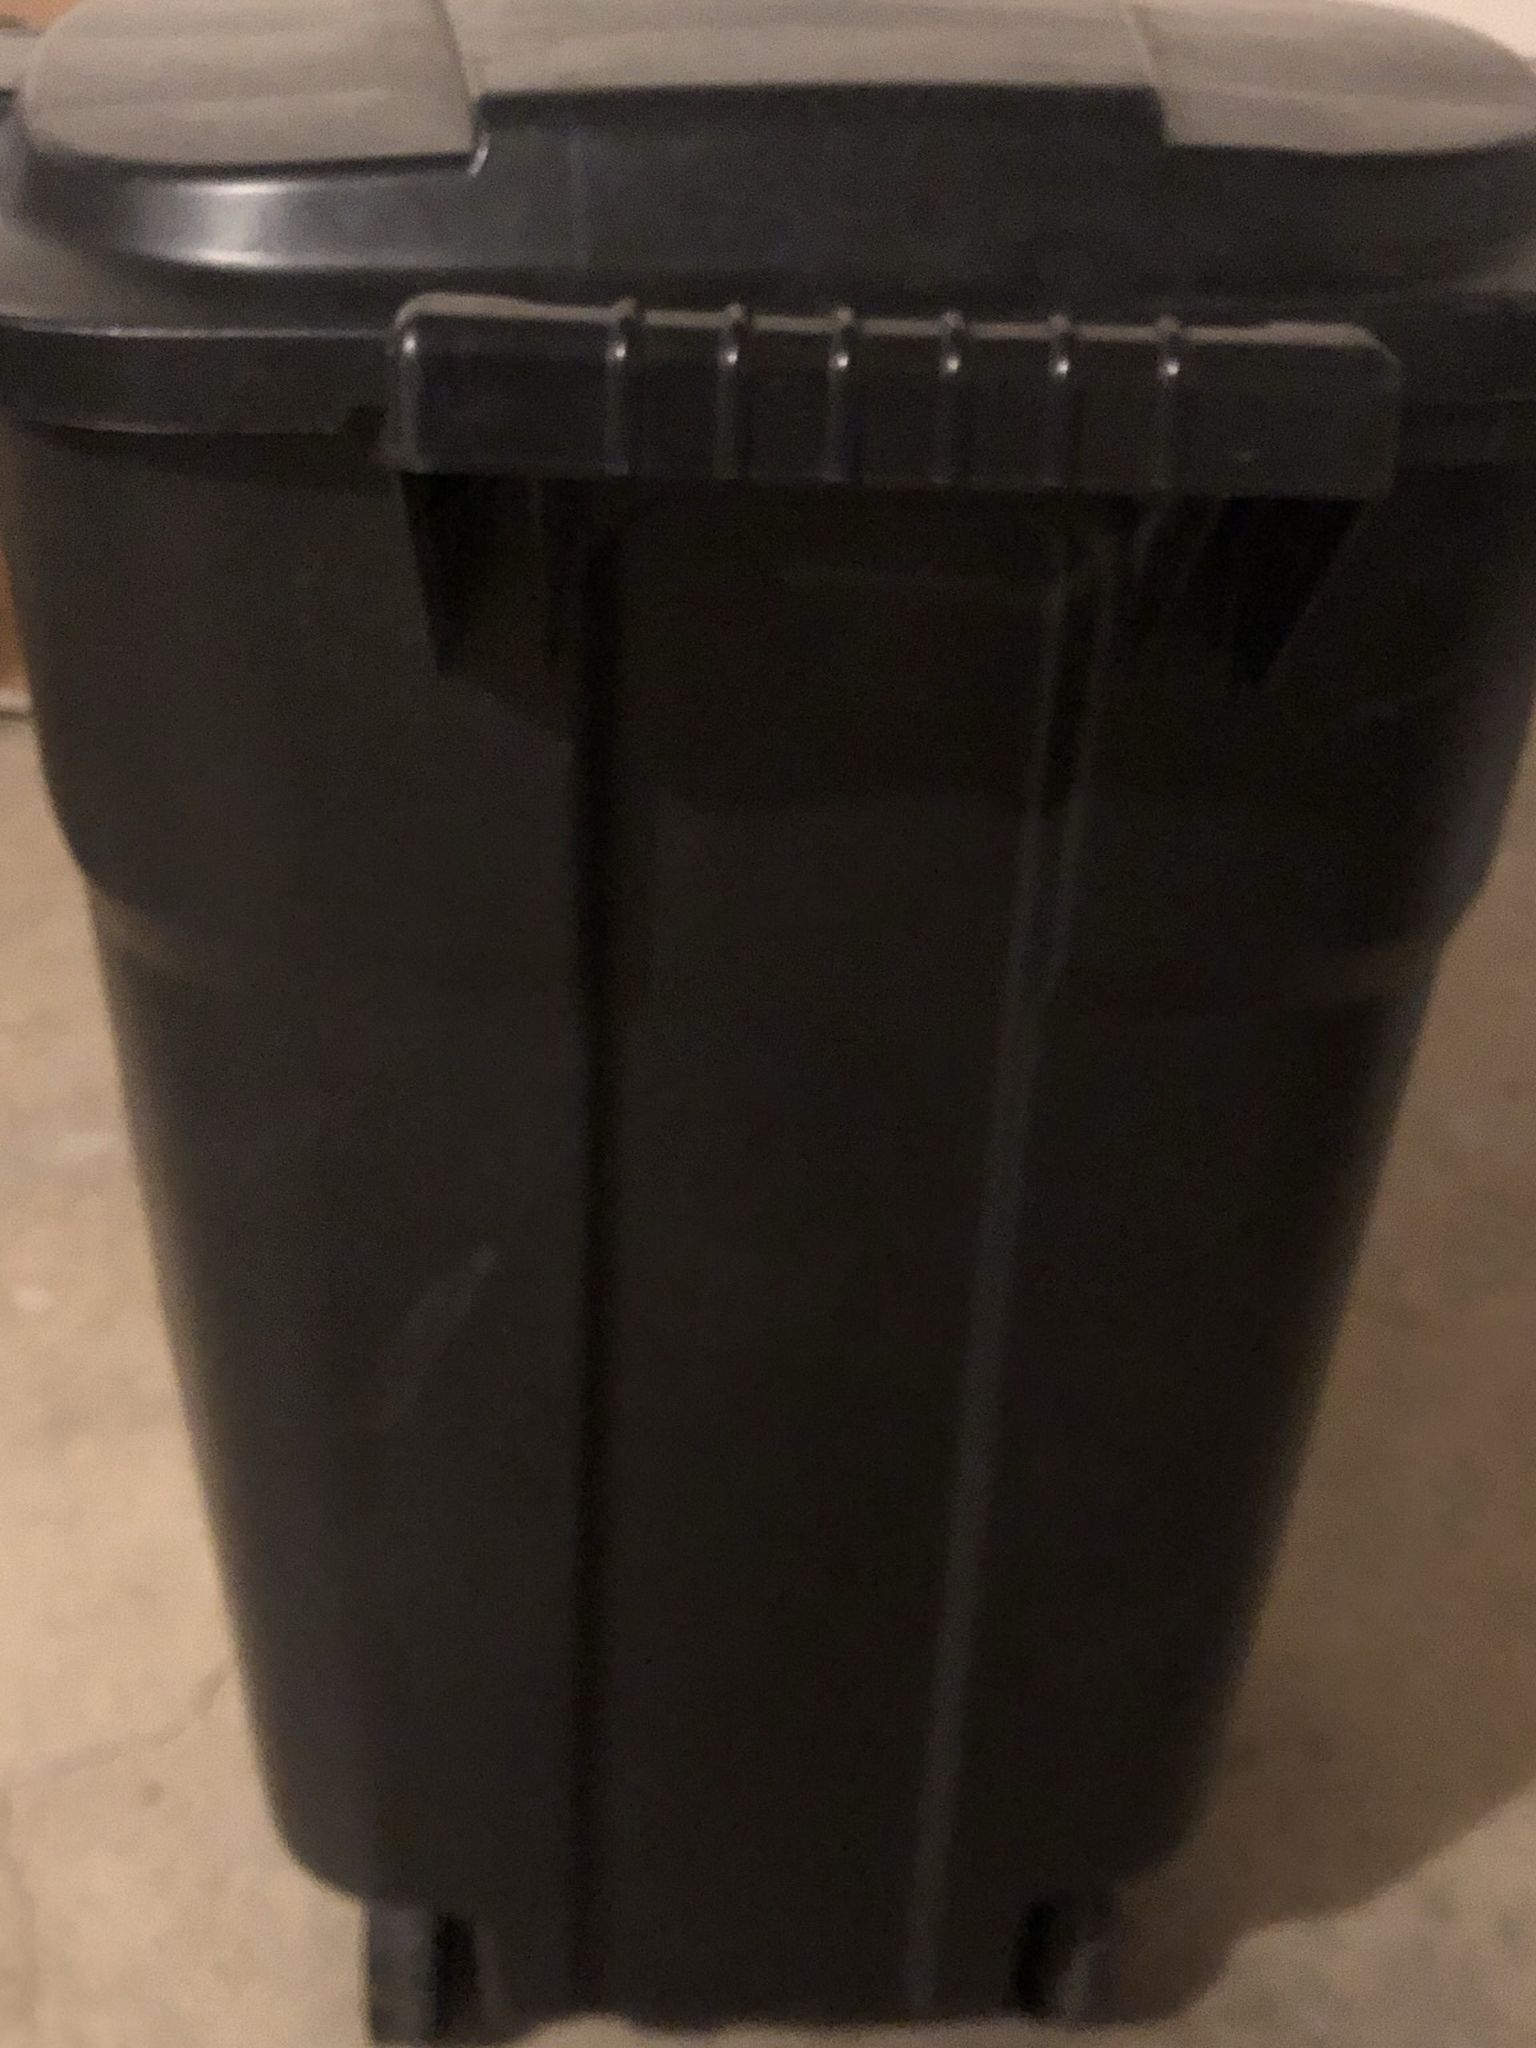 32 Gallons Garbage Can with Lid